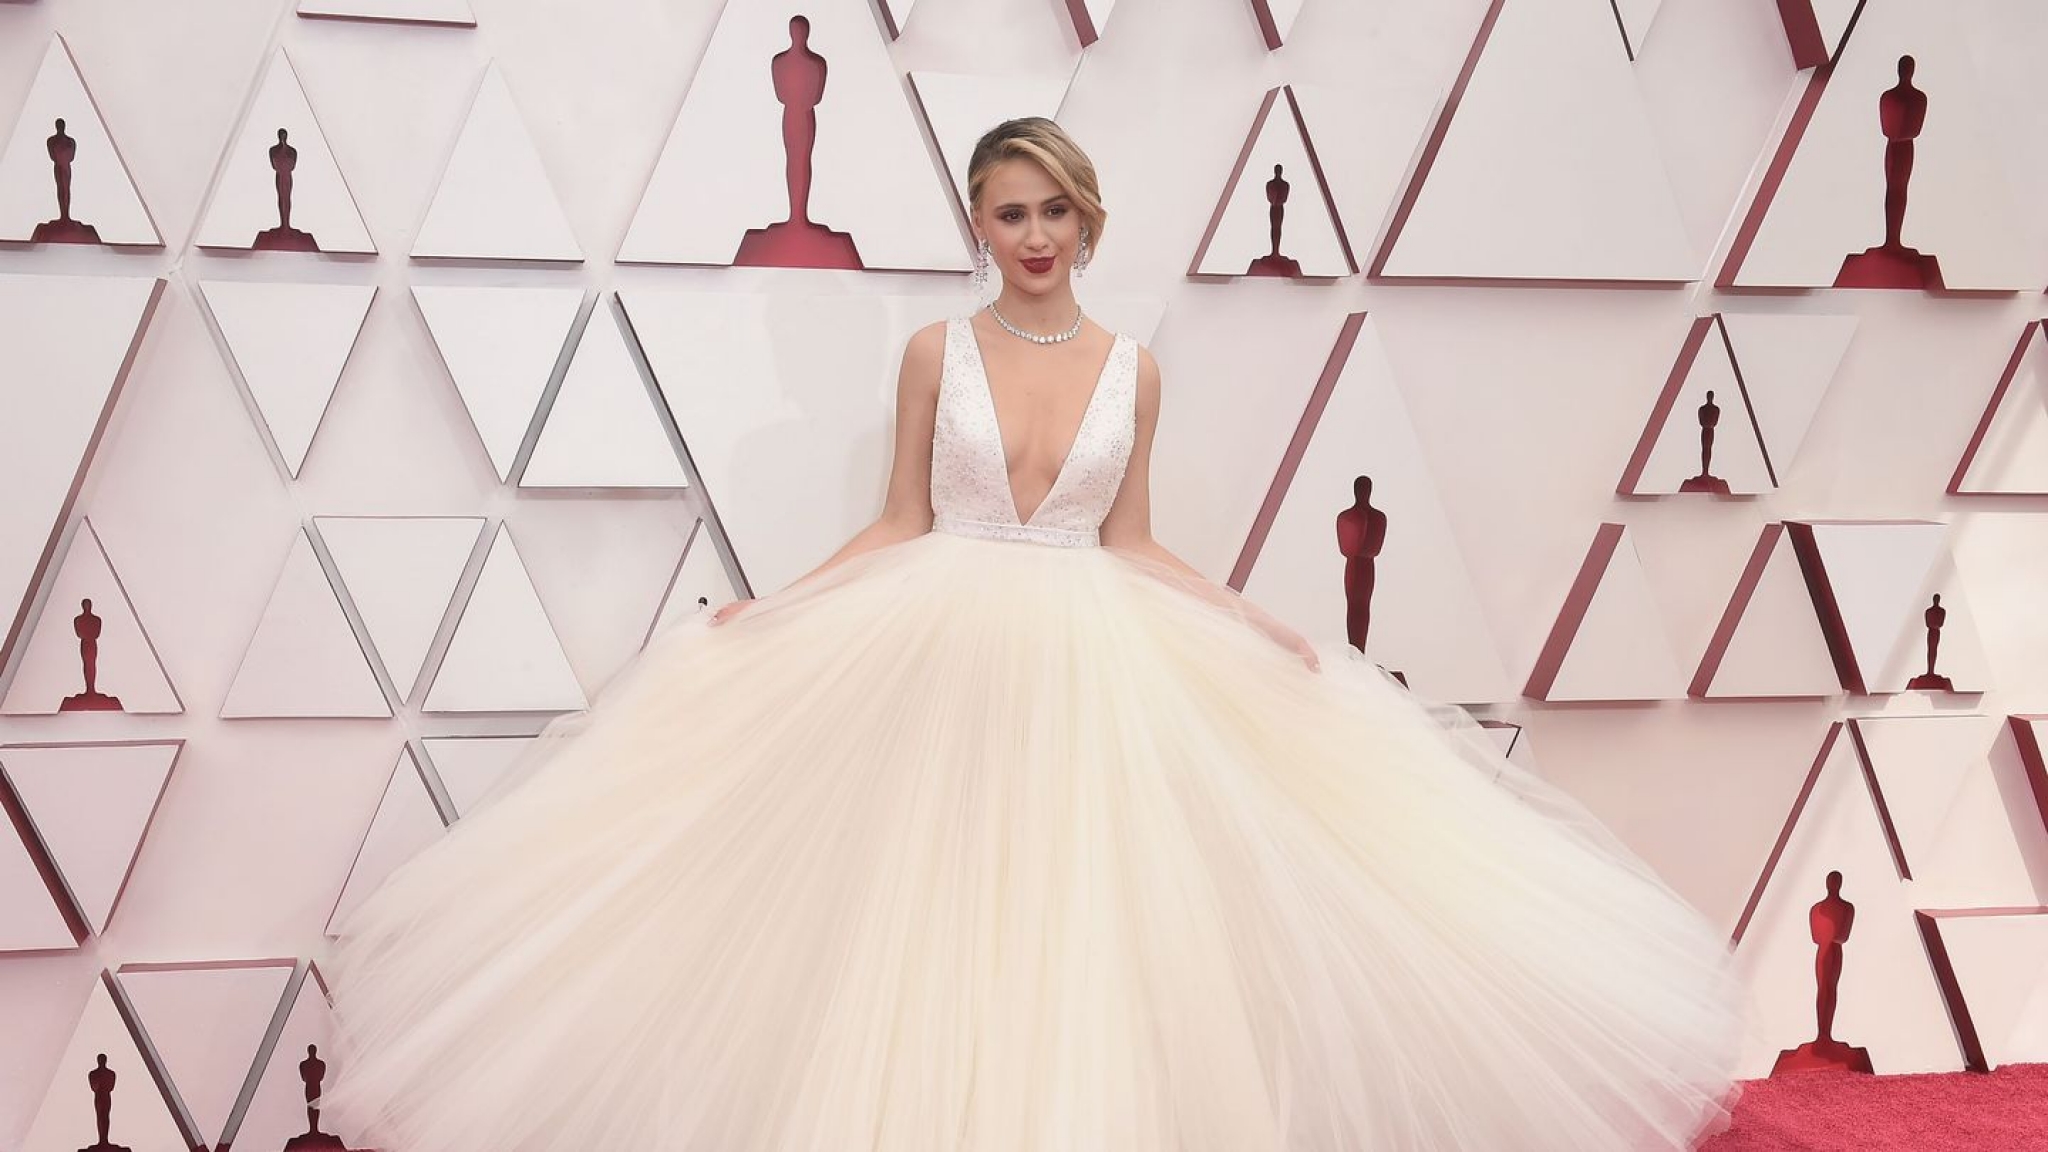 Oscars 2021 Red Carpet: See All The Jaw-Dropping Fashion